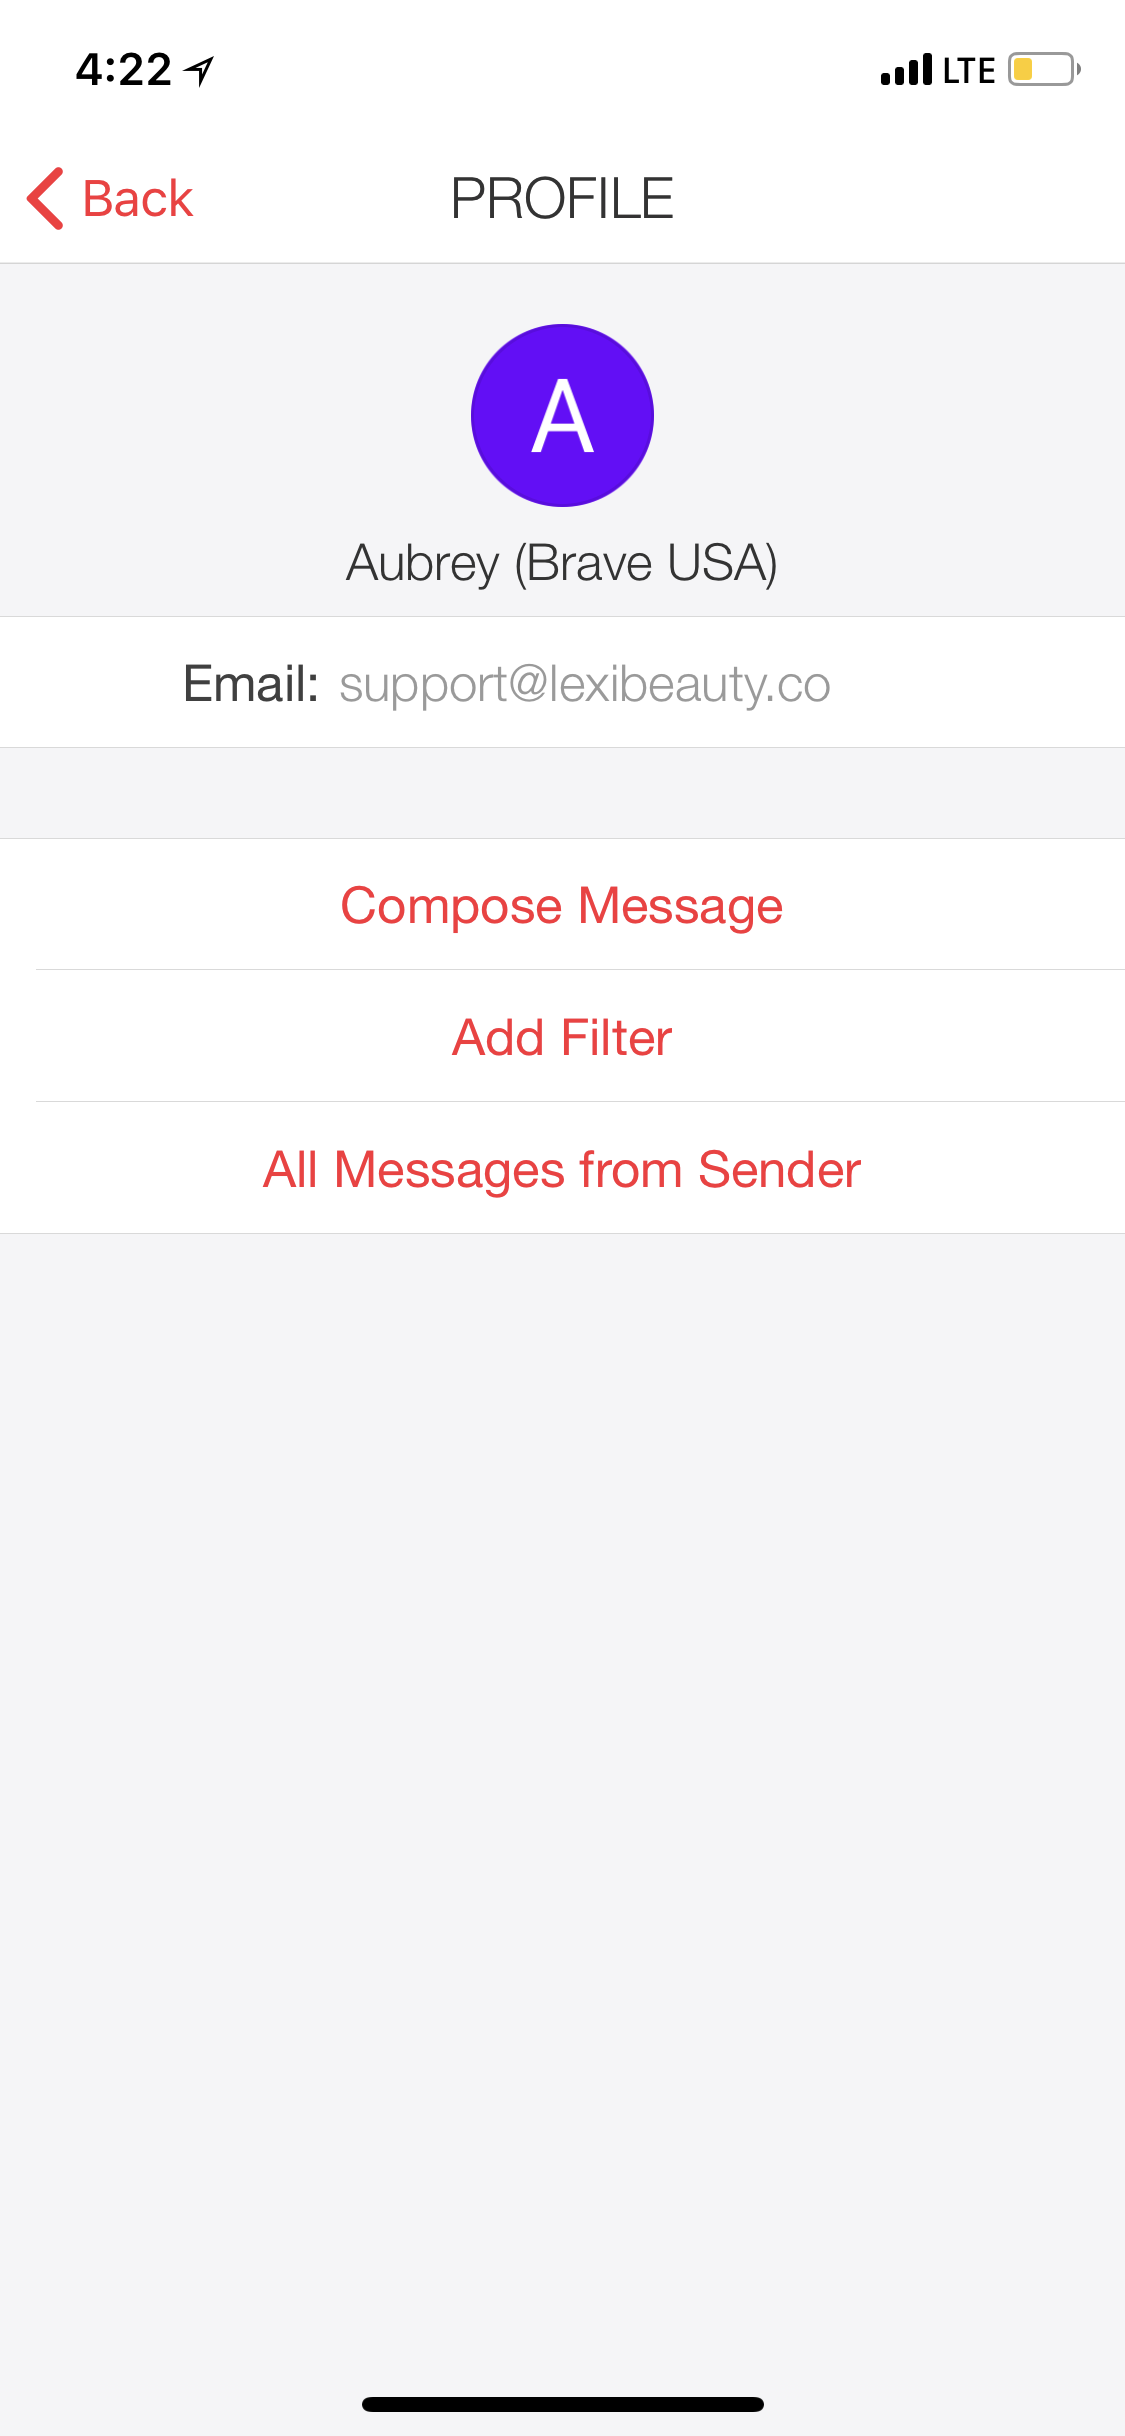 Email address of customer service from Lexibeauty